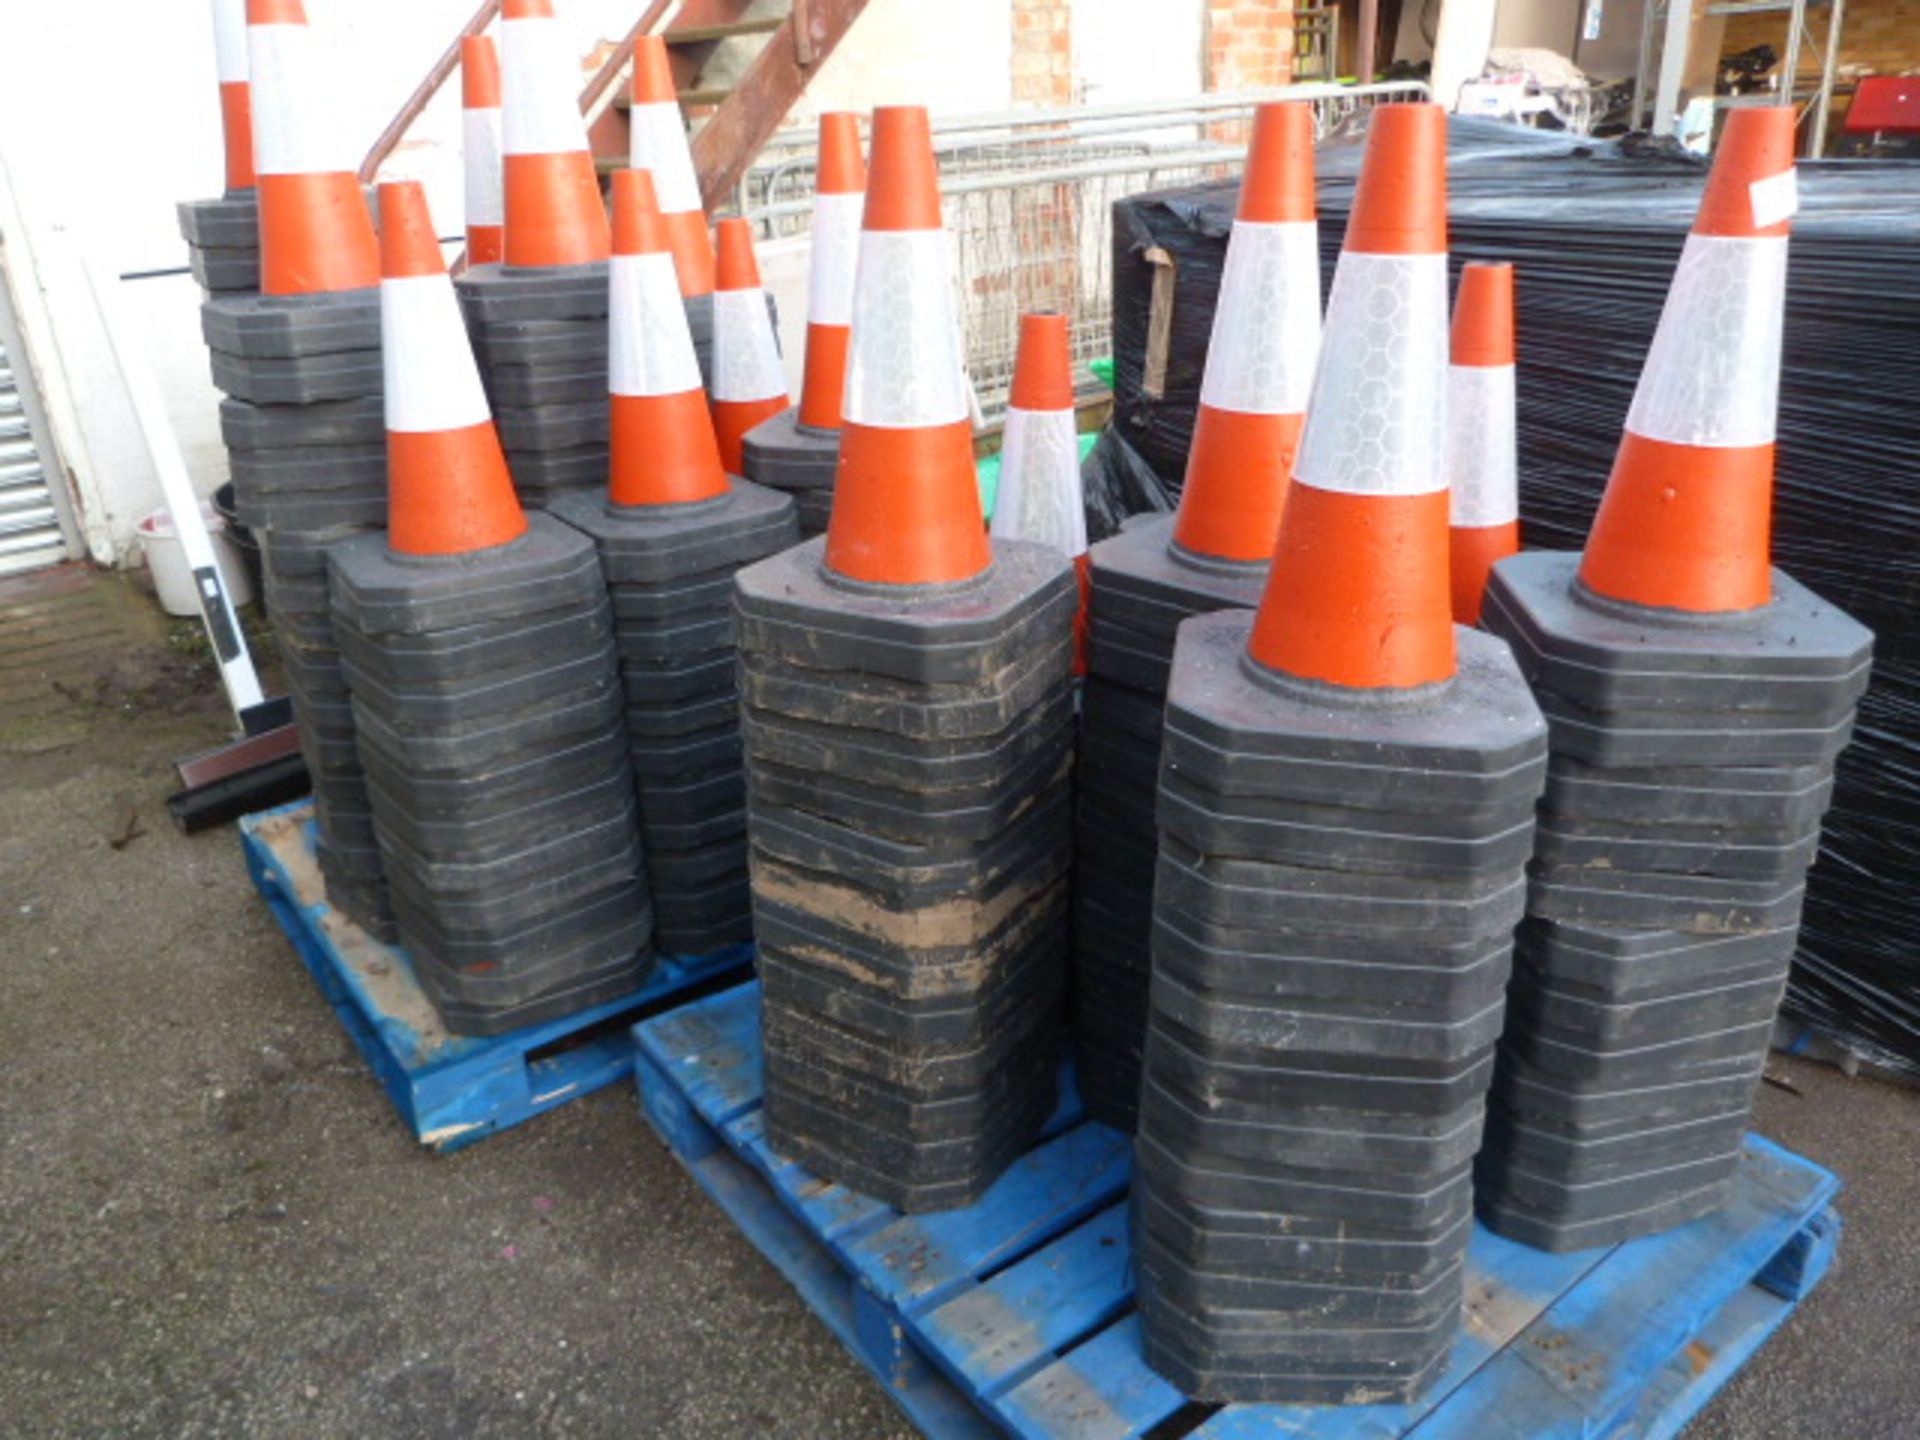 2 Pallets containing Approx 185 Traffic Cones